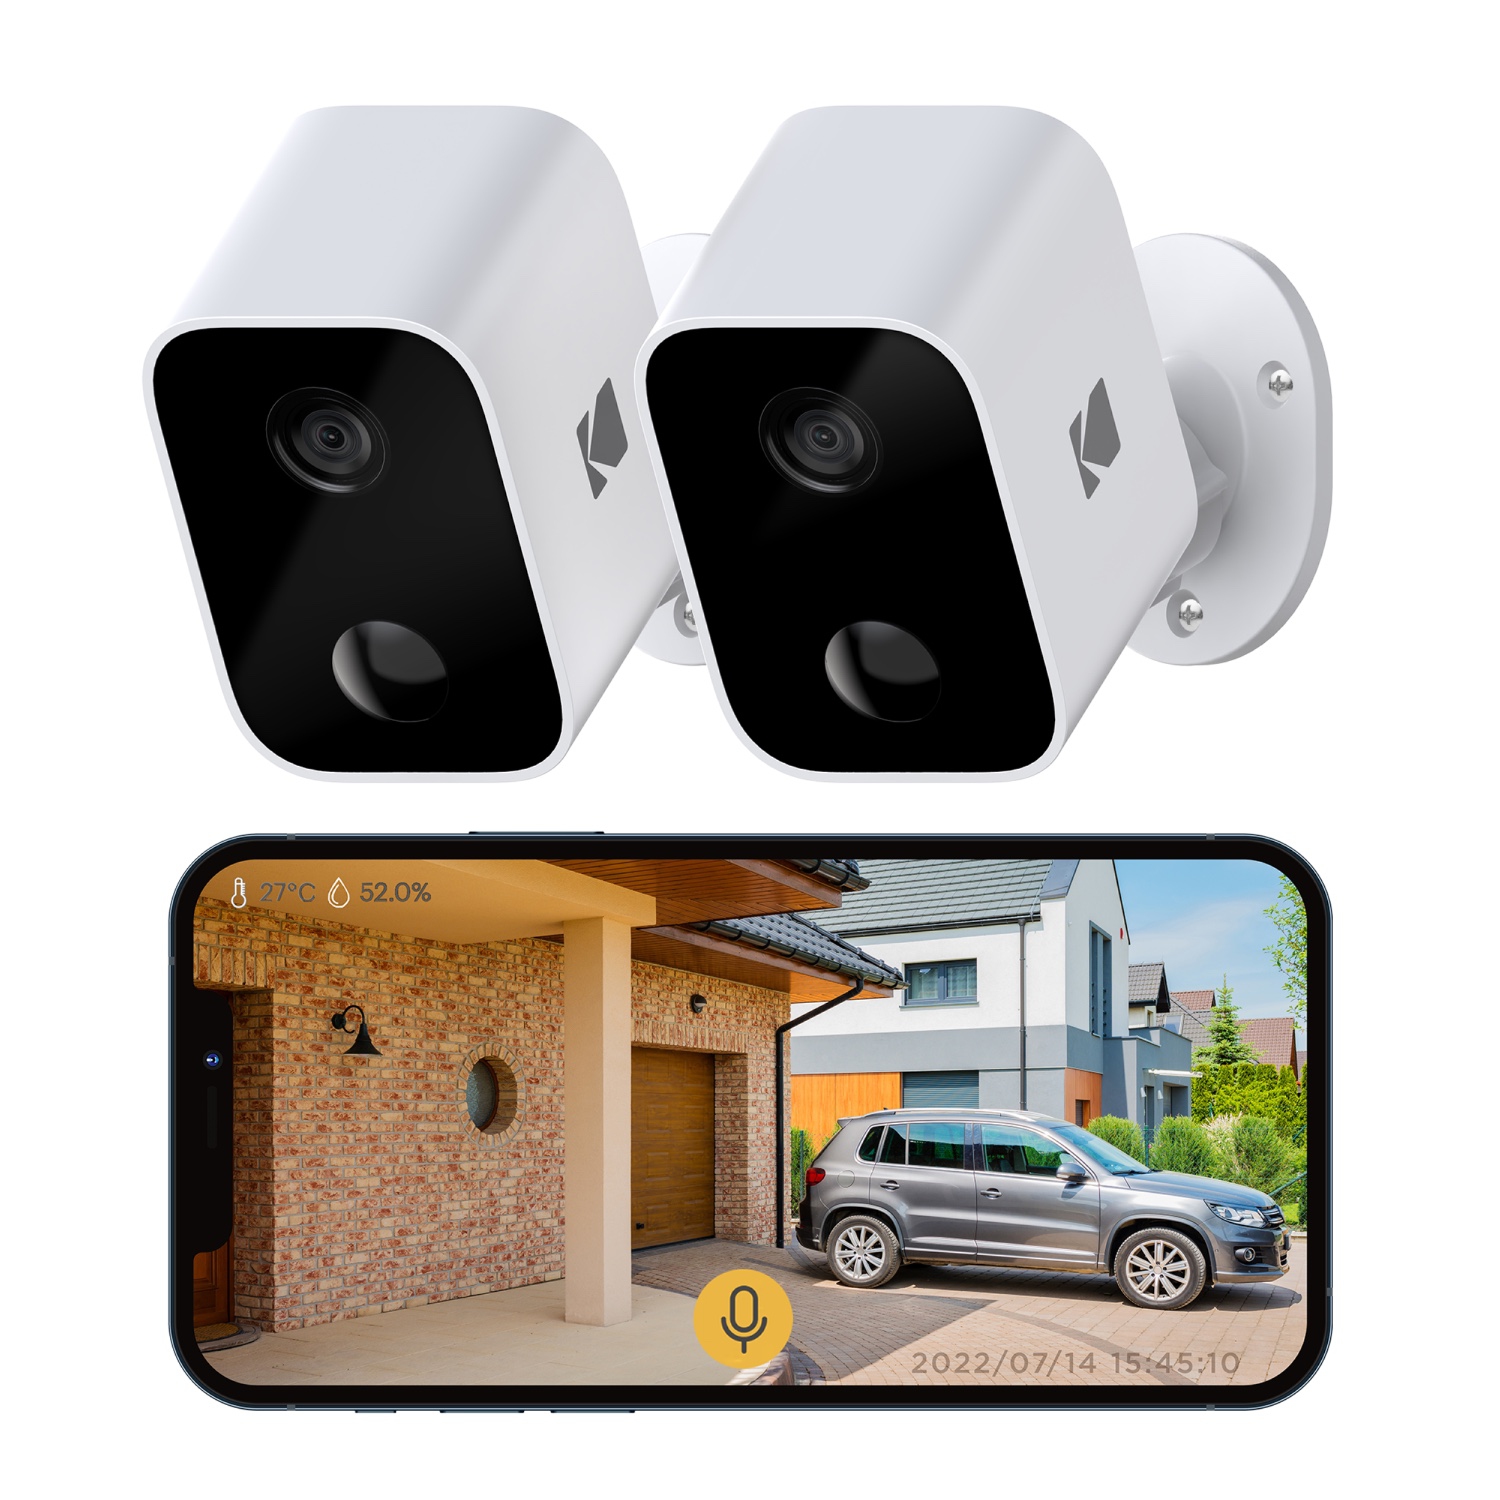 Kodak Infinio Wireless Security Camera | Dual Pack | Full HD | Motion Detection | Night Vision | Up to 90 days battery life (F882) - White